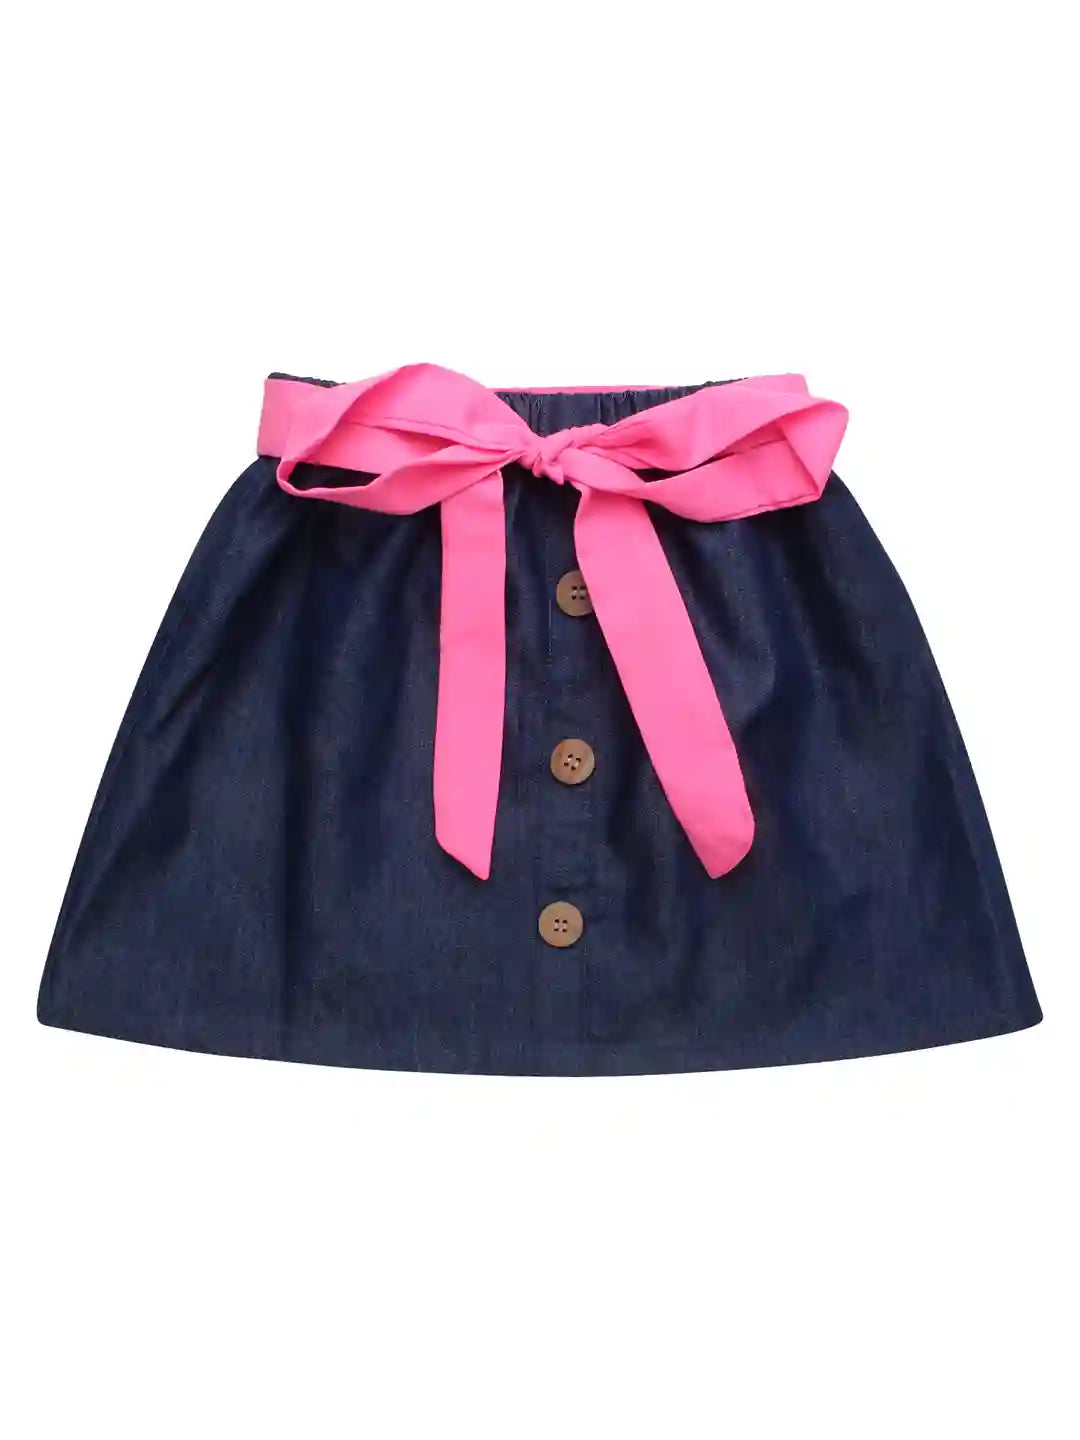 Girls Pure Cotton Denim Top with Skirt Co-ord Set, Navy Blue Colour